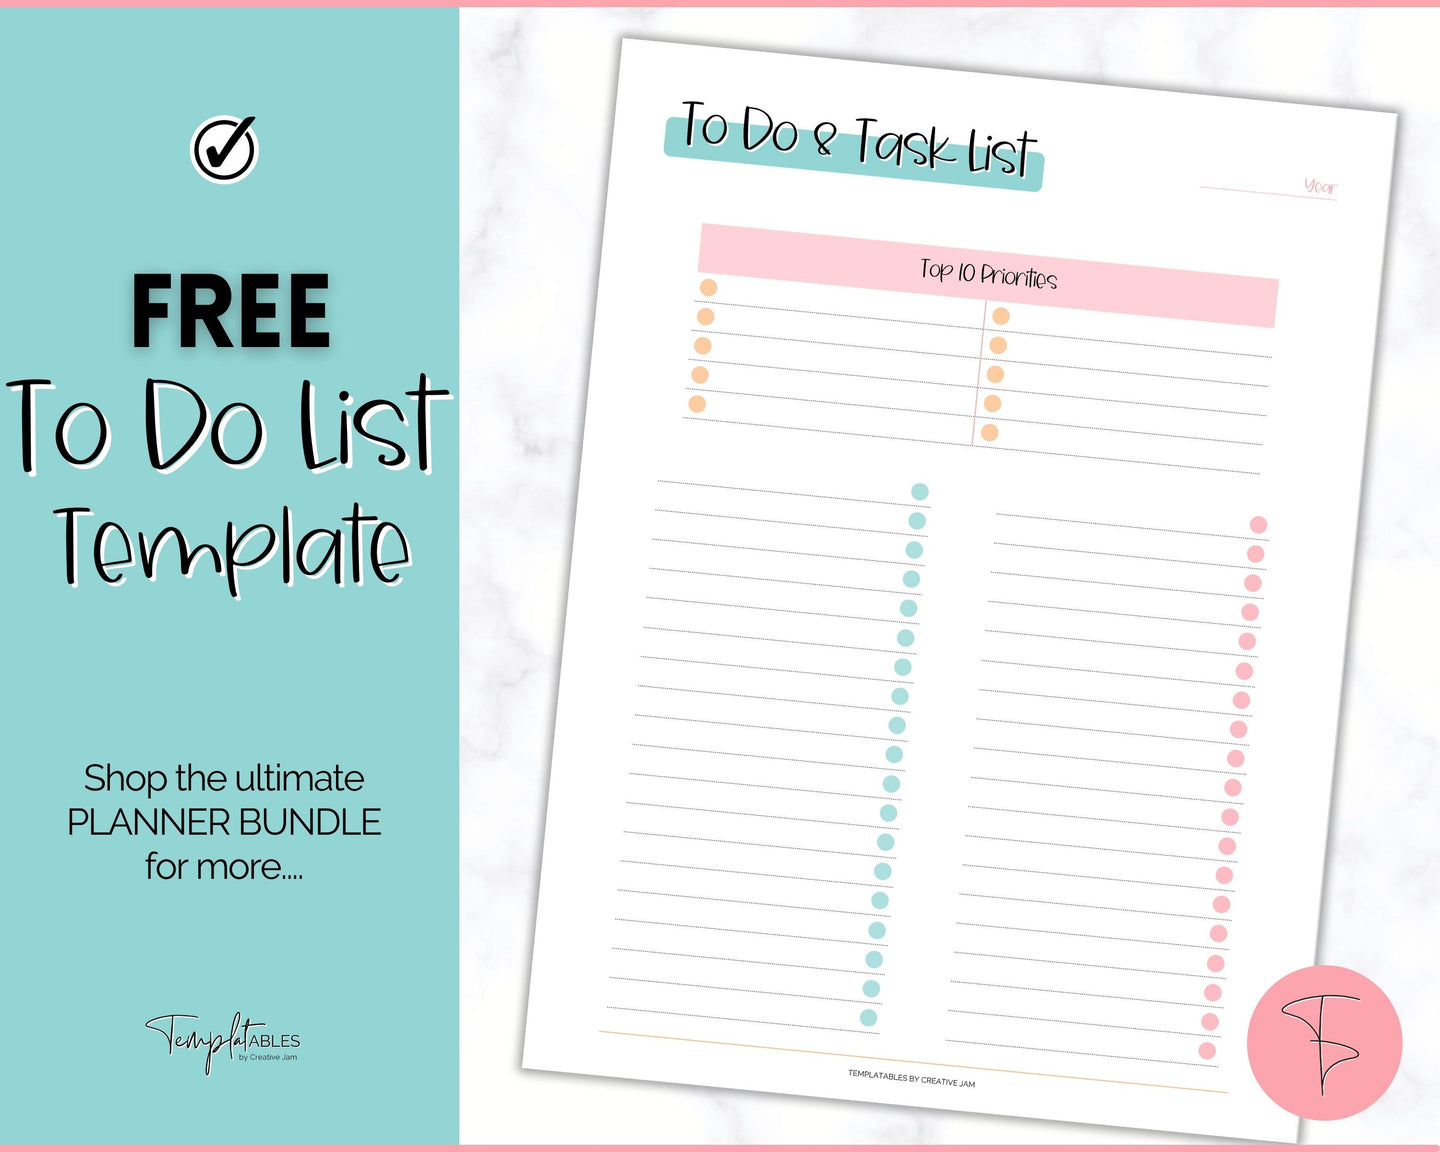 FREE - To Do List Printable, Productivity Planner, Task Checklist, Priorities List, Undated Schedule | Colorful Sky